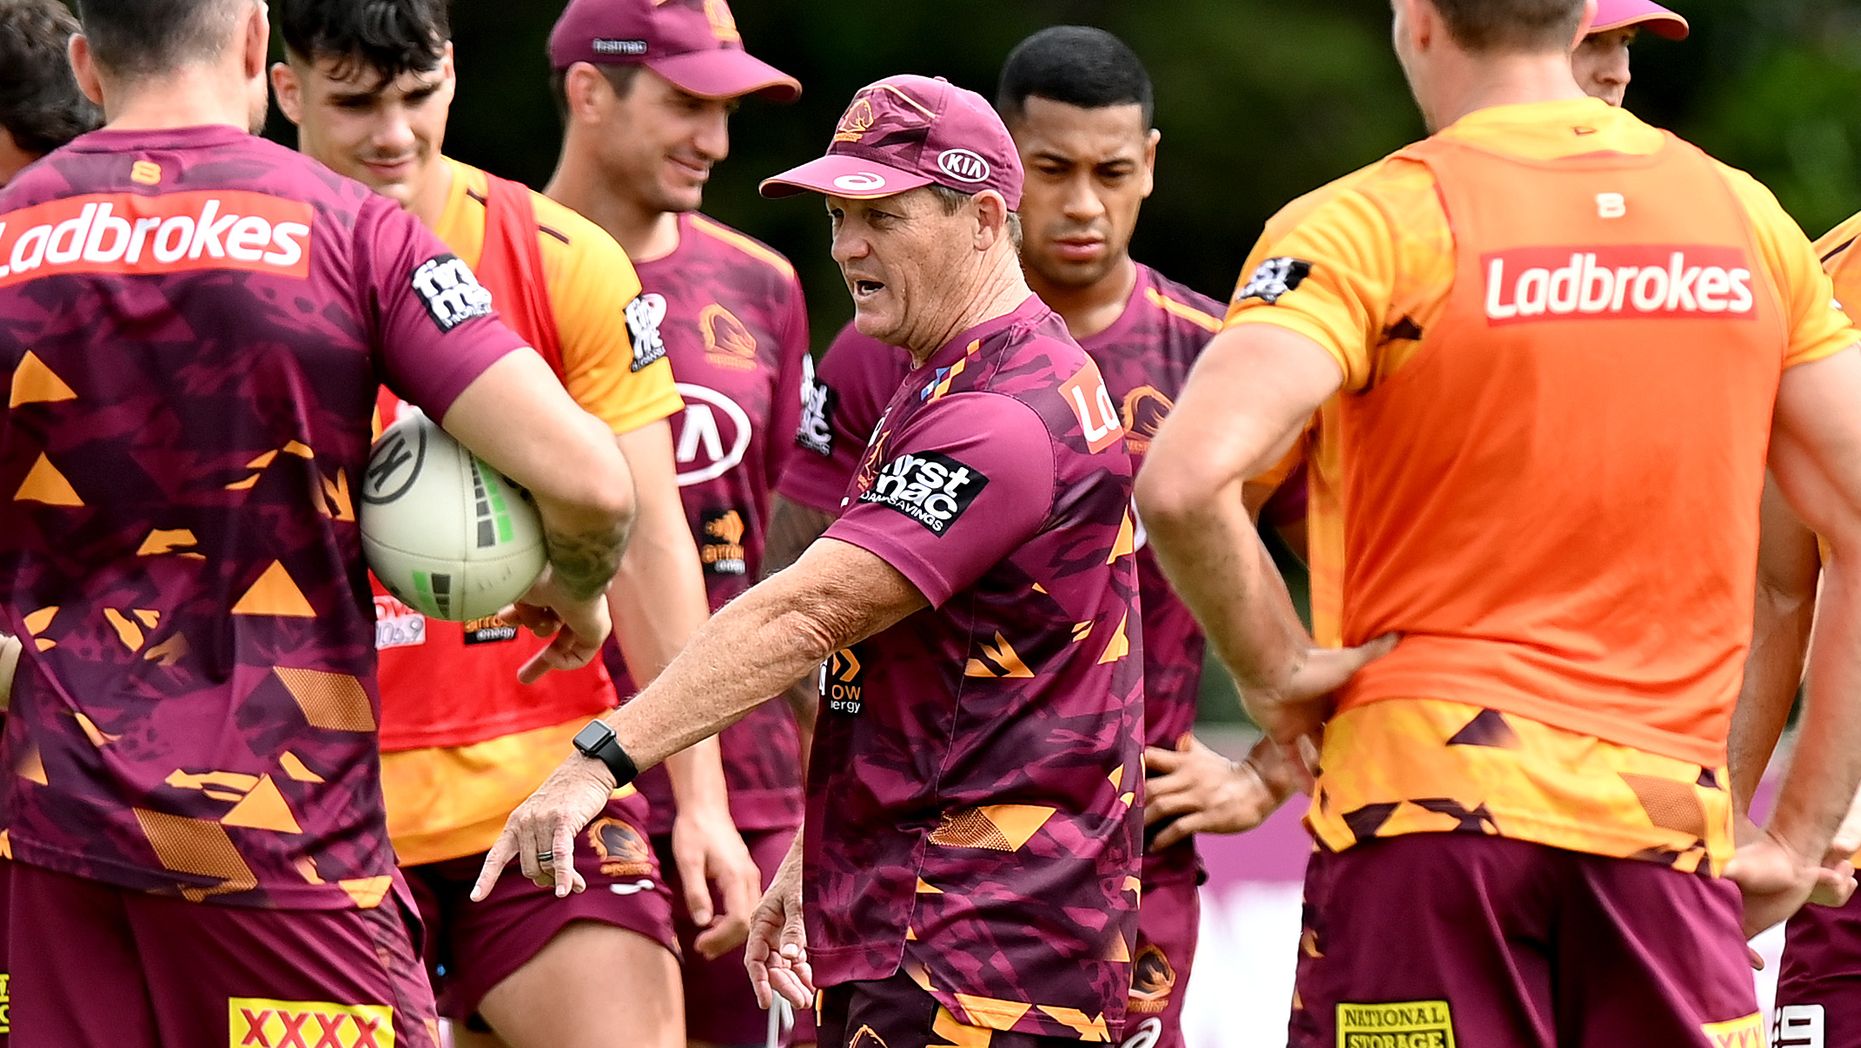 Coach Kevin Walters instructs the players during a Brisbane Broncos NRL training session.